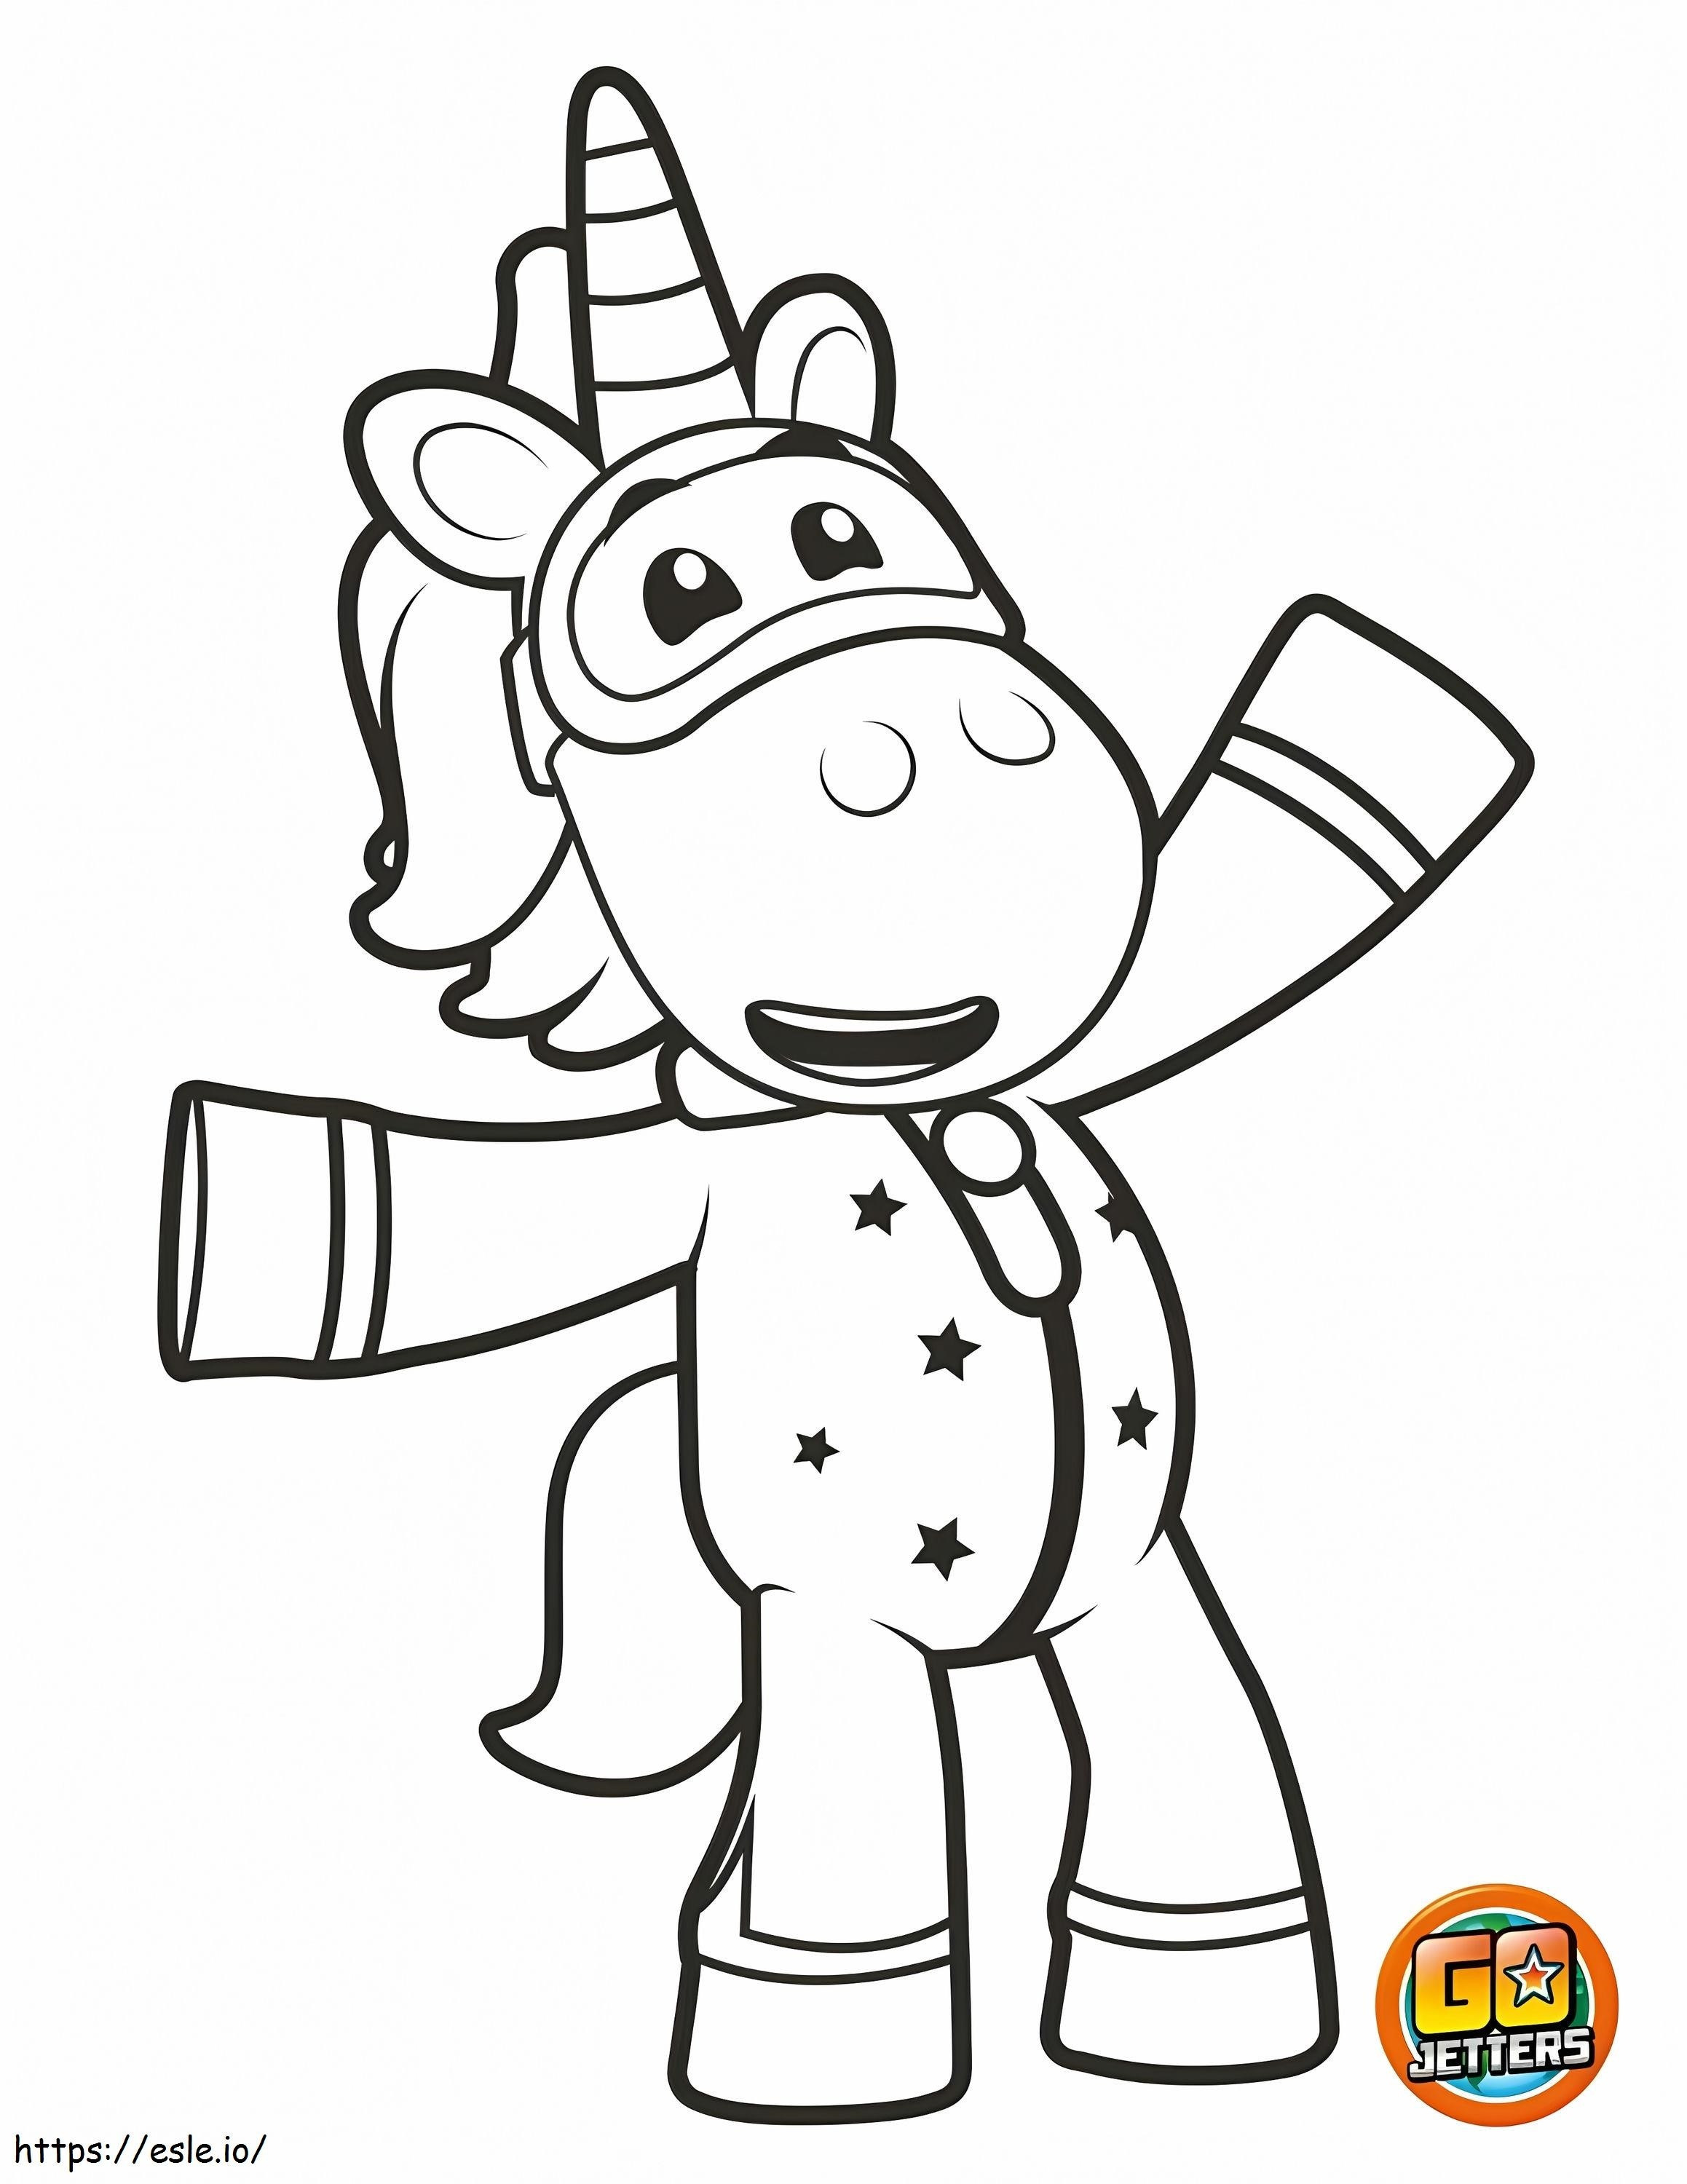 1583138798 Ubercorn 1 791X1024 1 coloring page